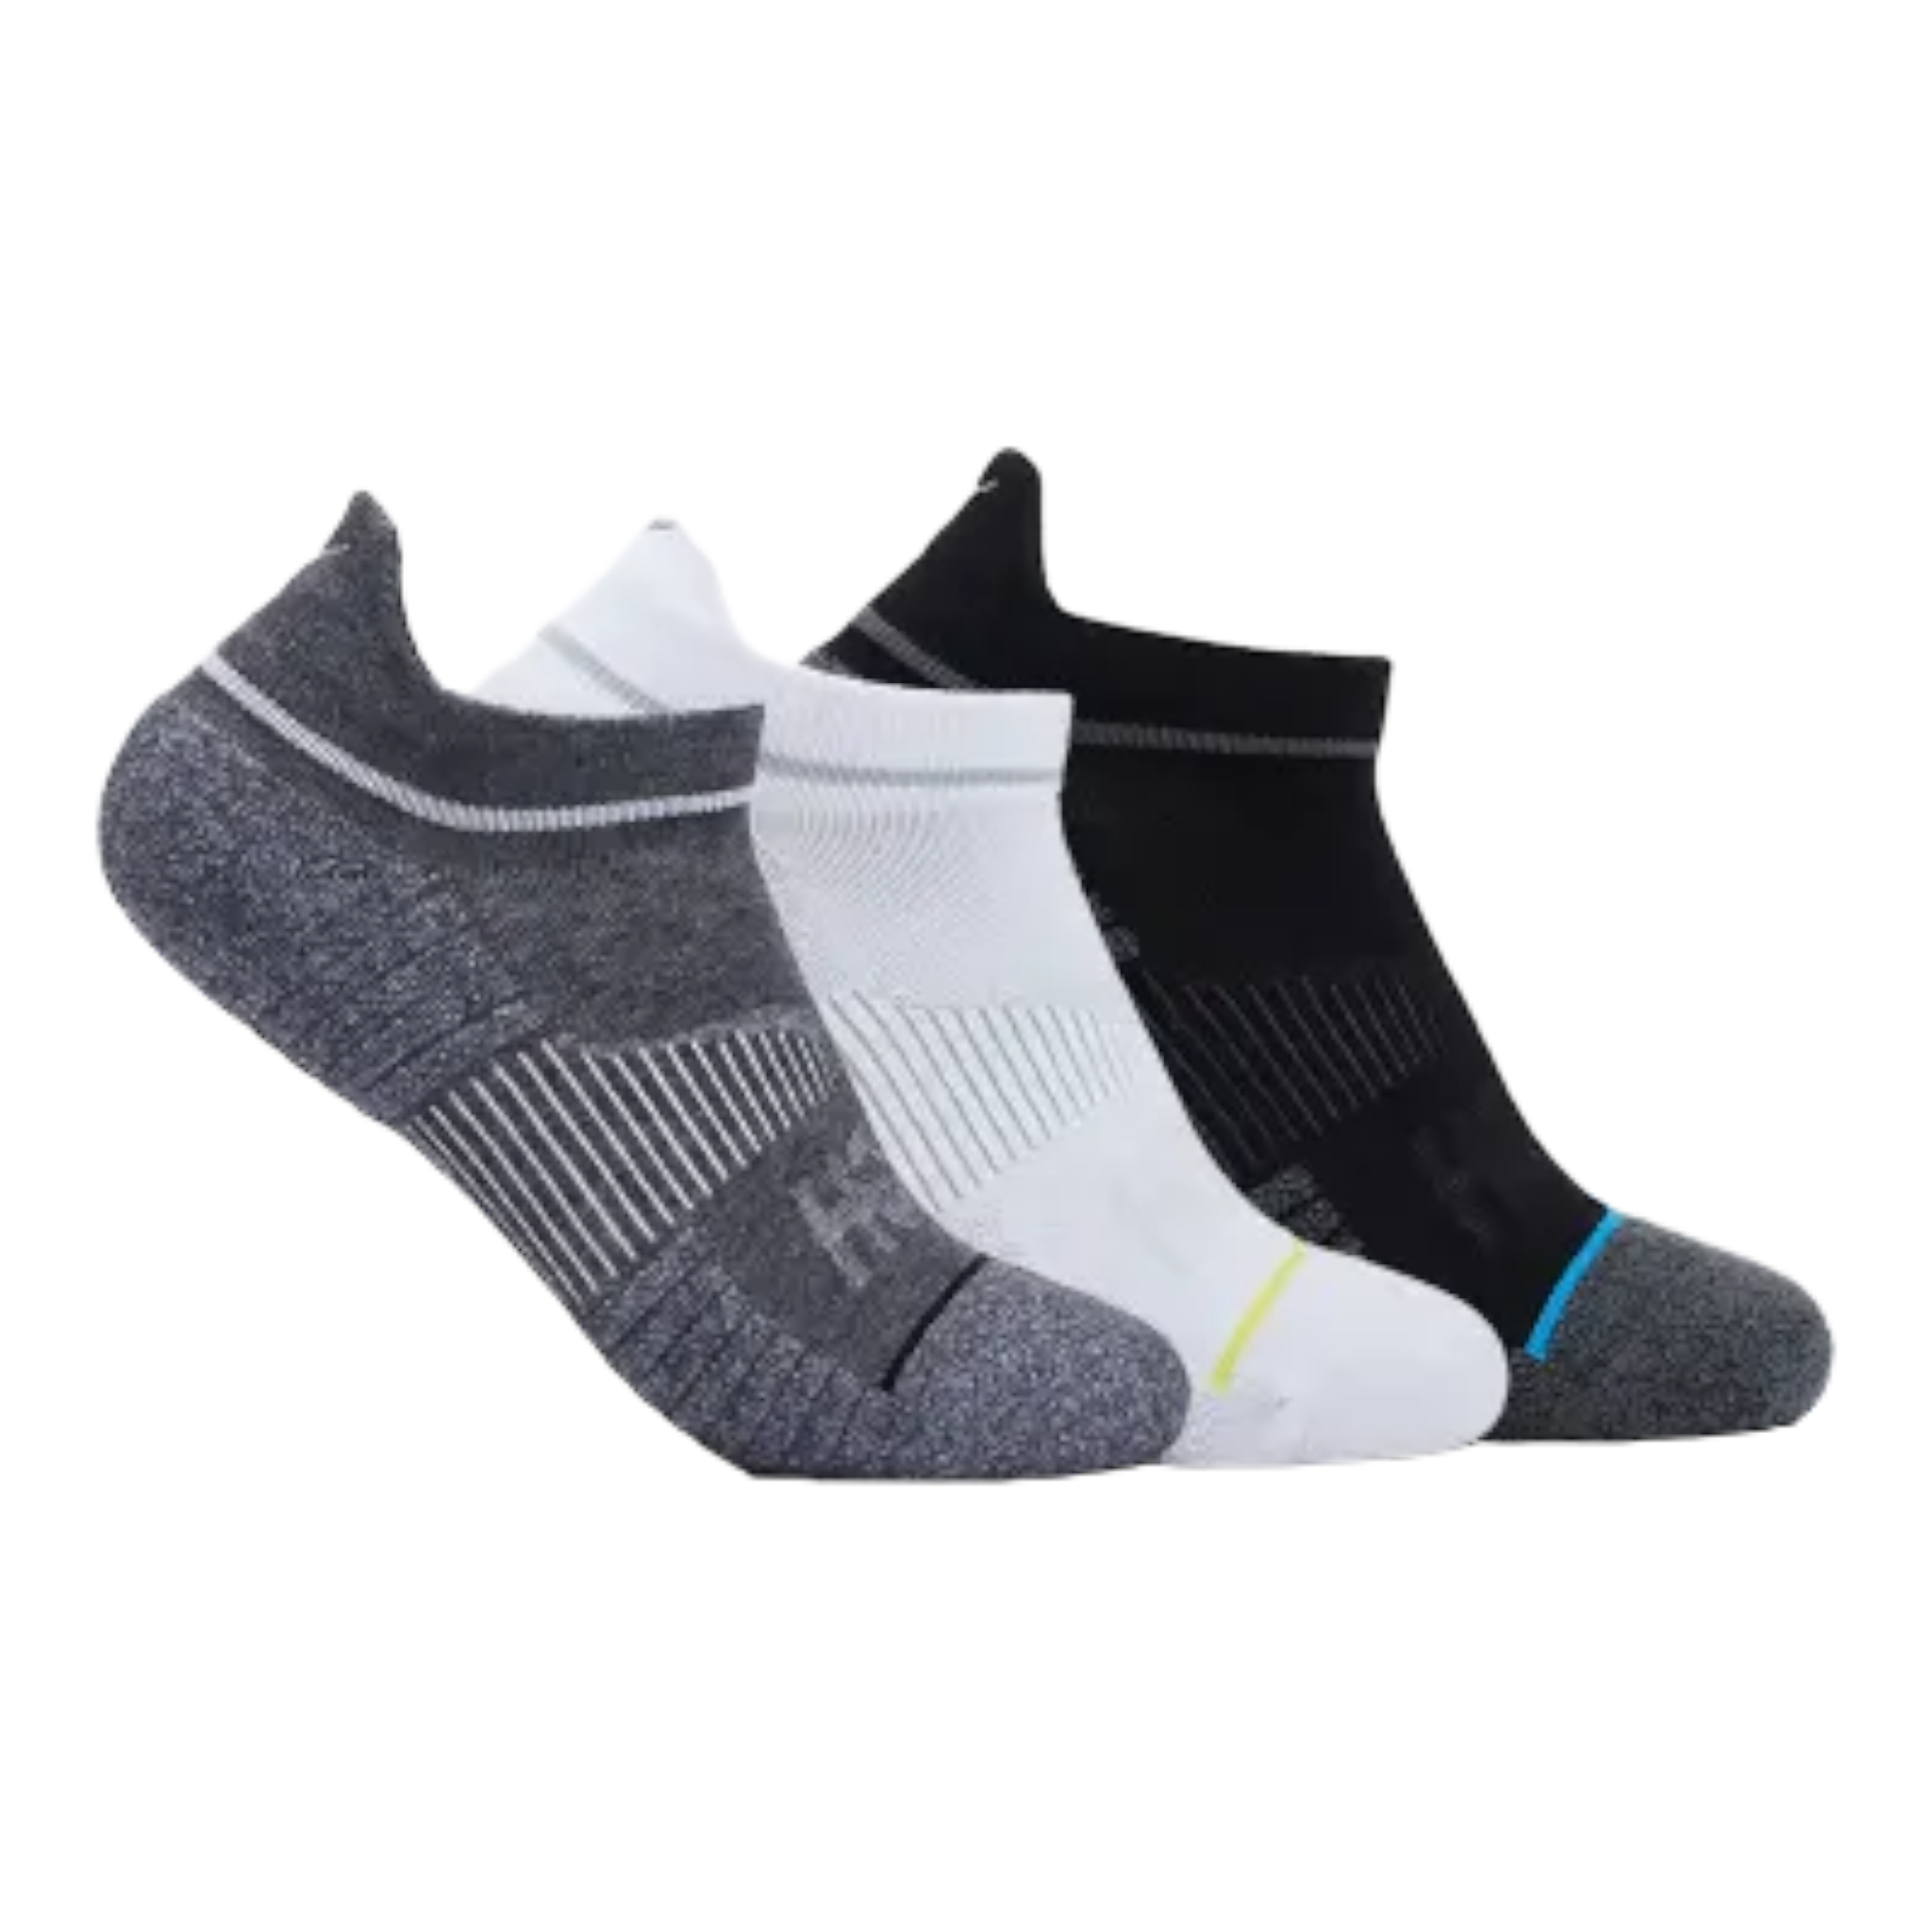 All Gender No-Show Run Sock 3-Pack - Dardano's Shoes